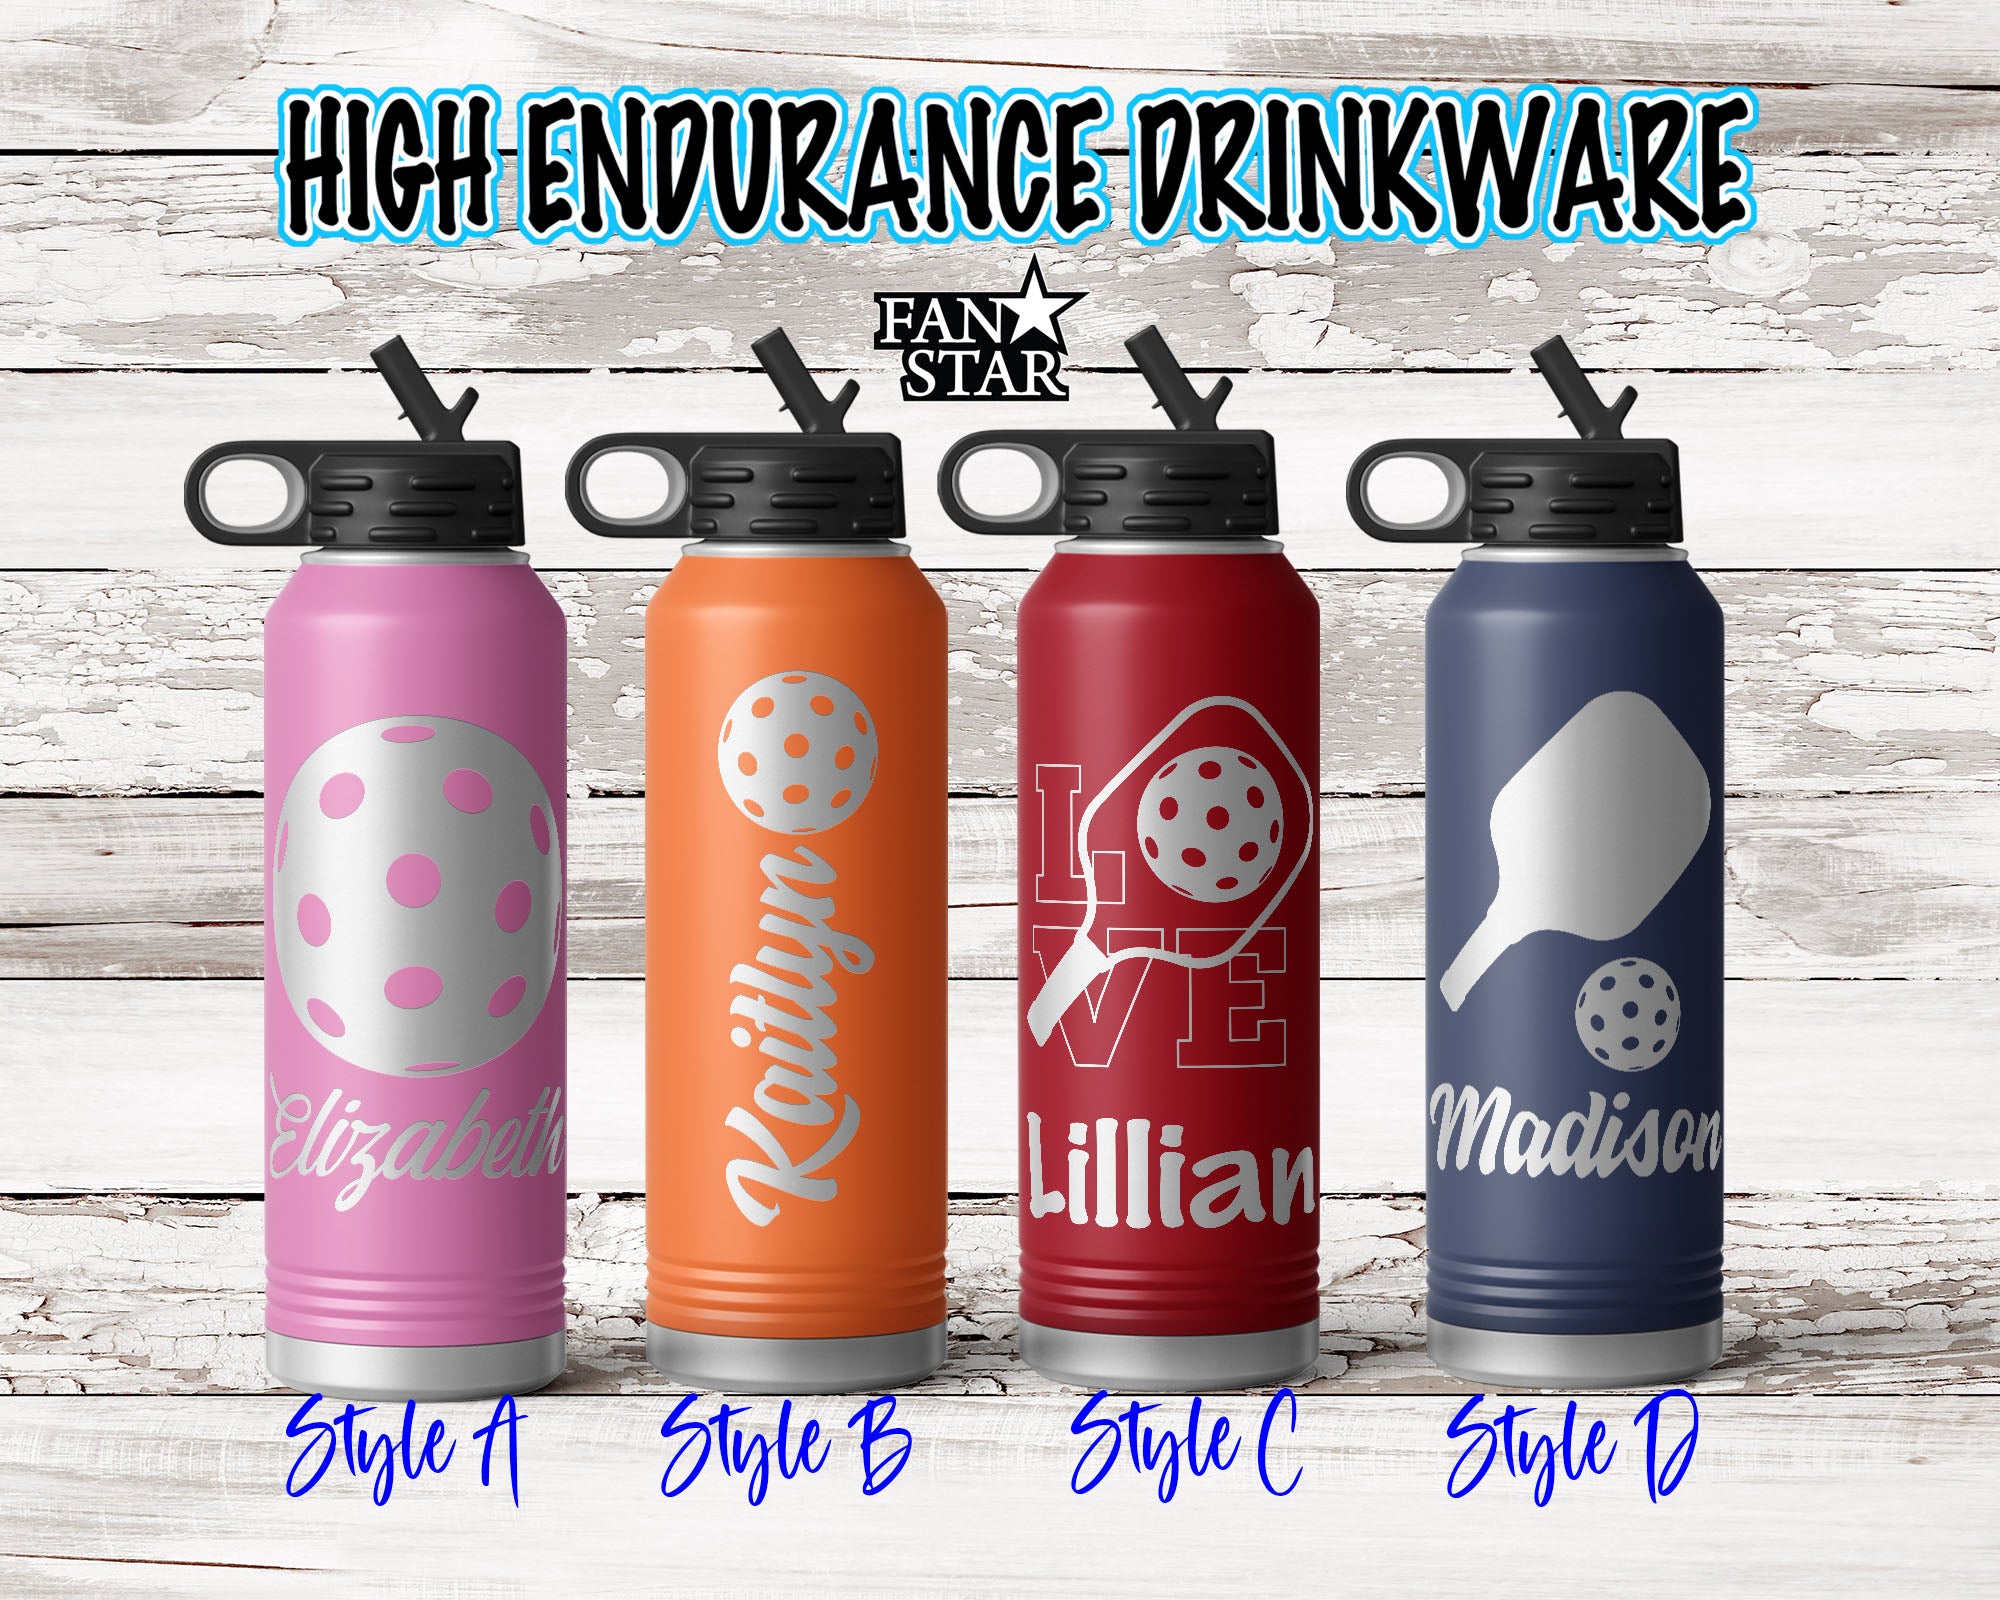 32oz Insulated Water Bottle with engraved logo